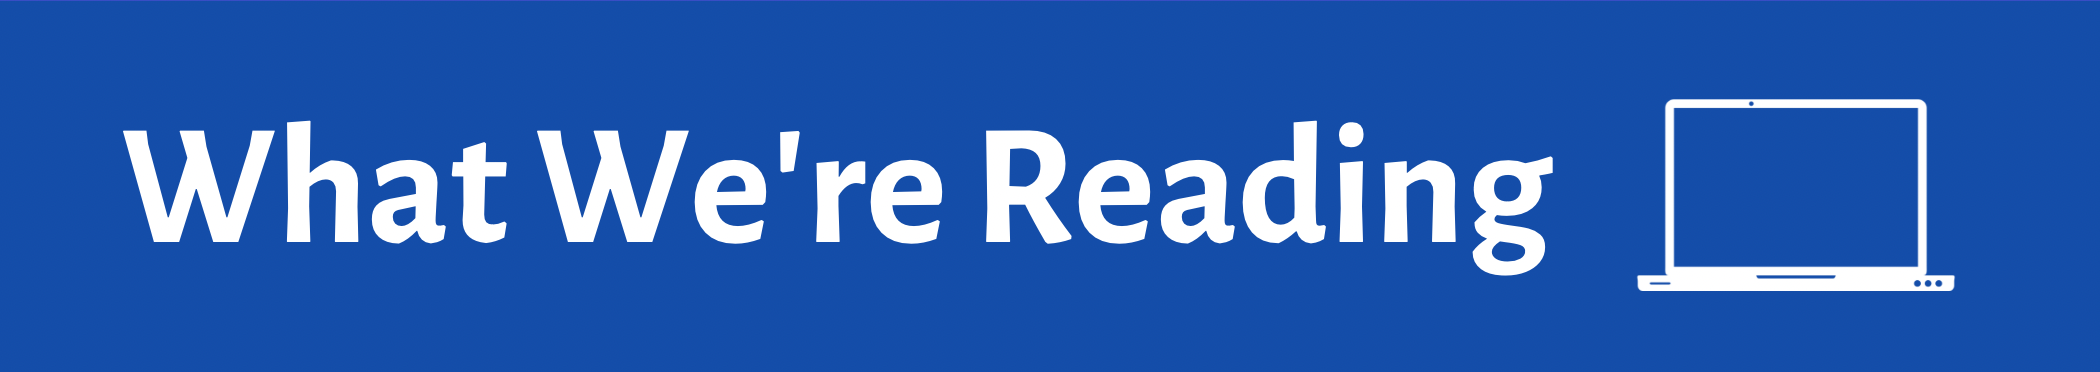 Readings Banner.png